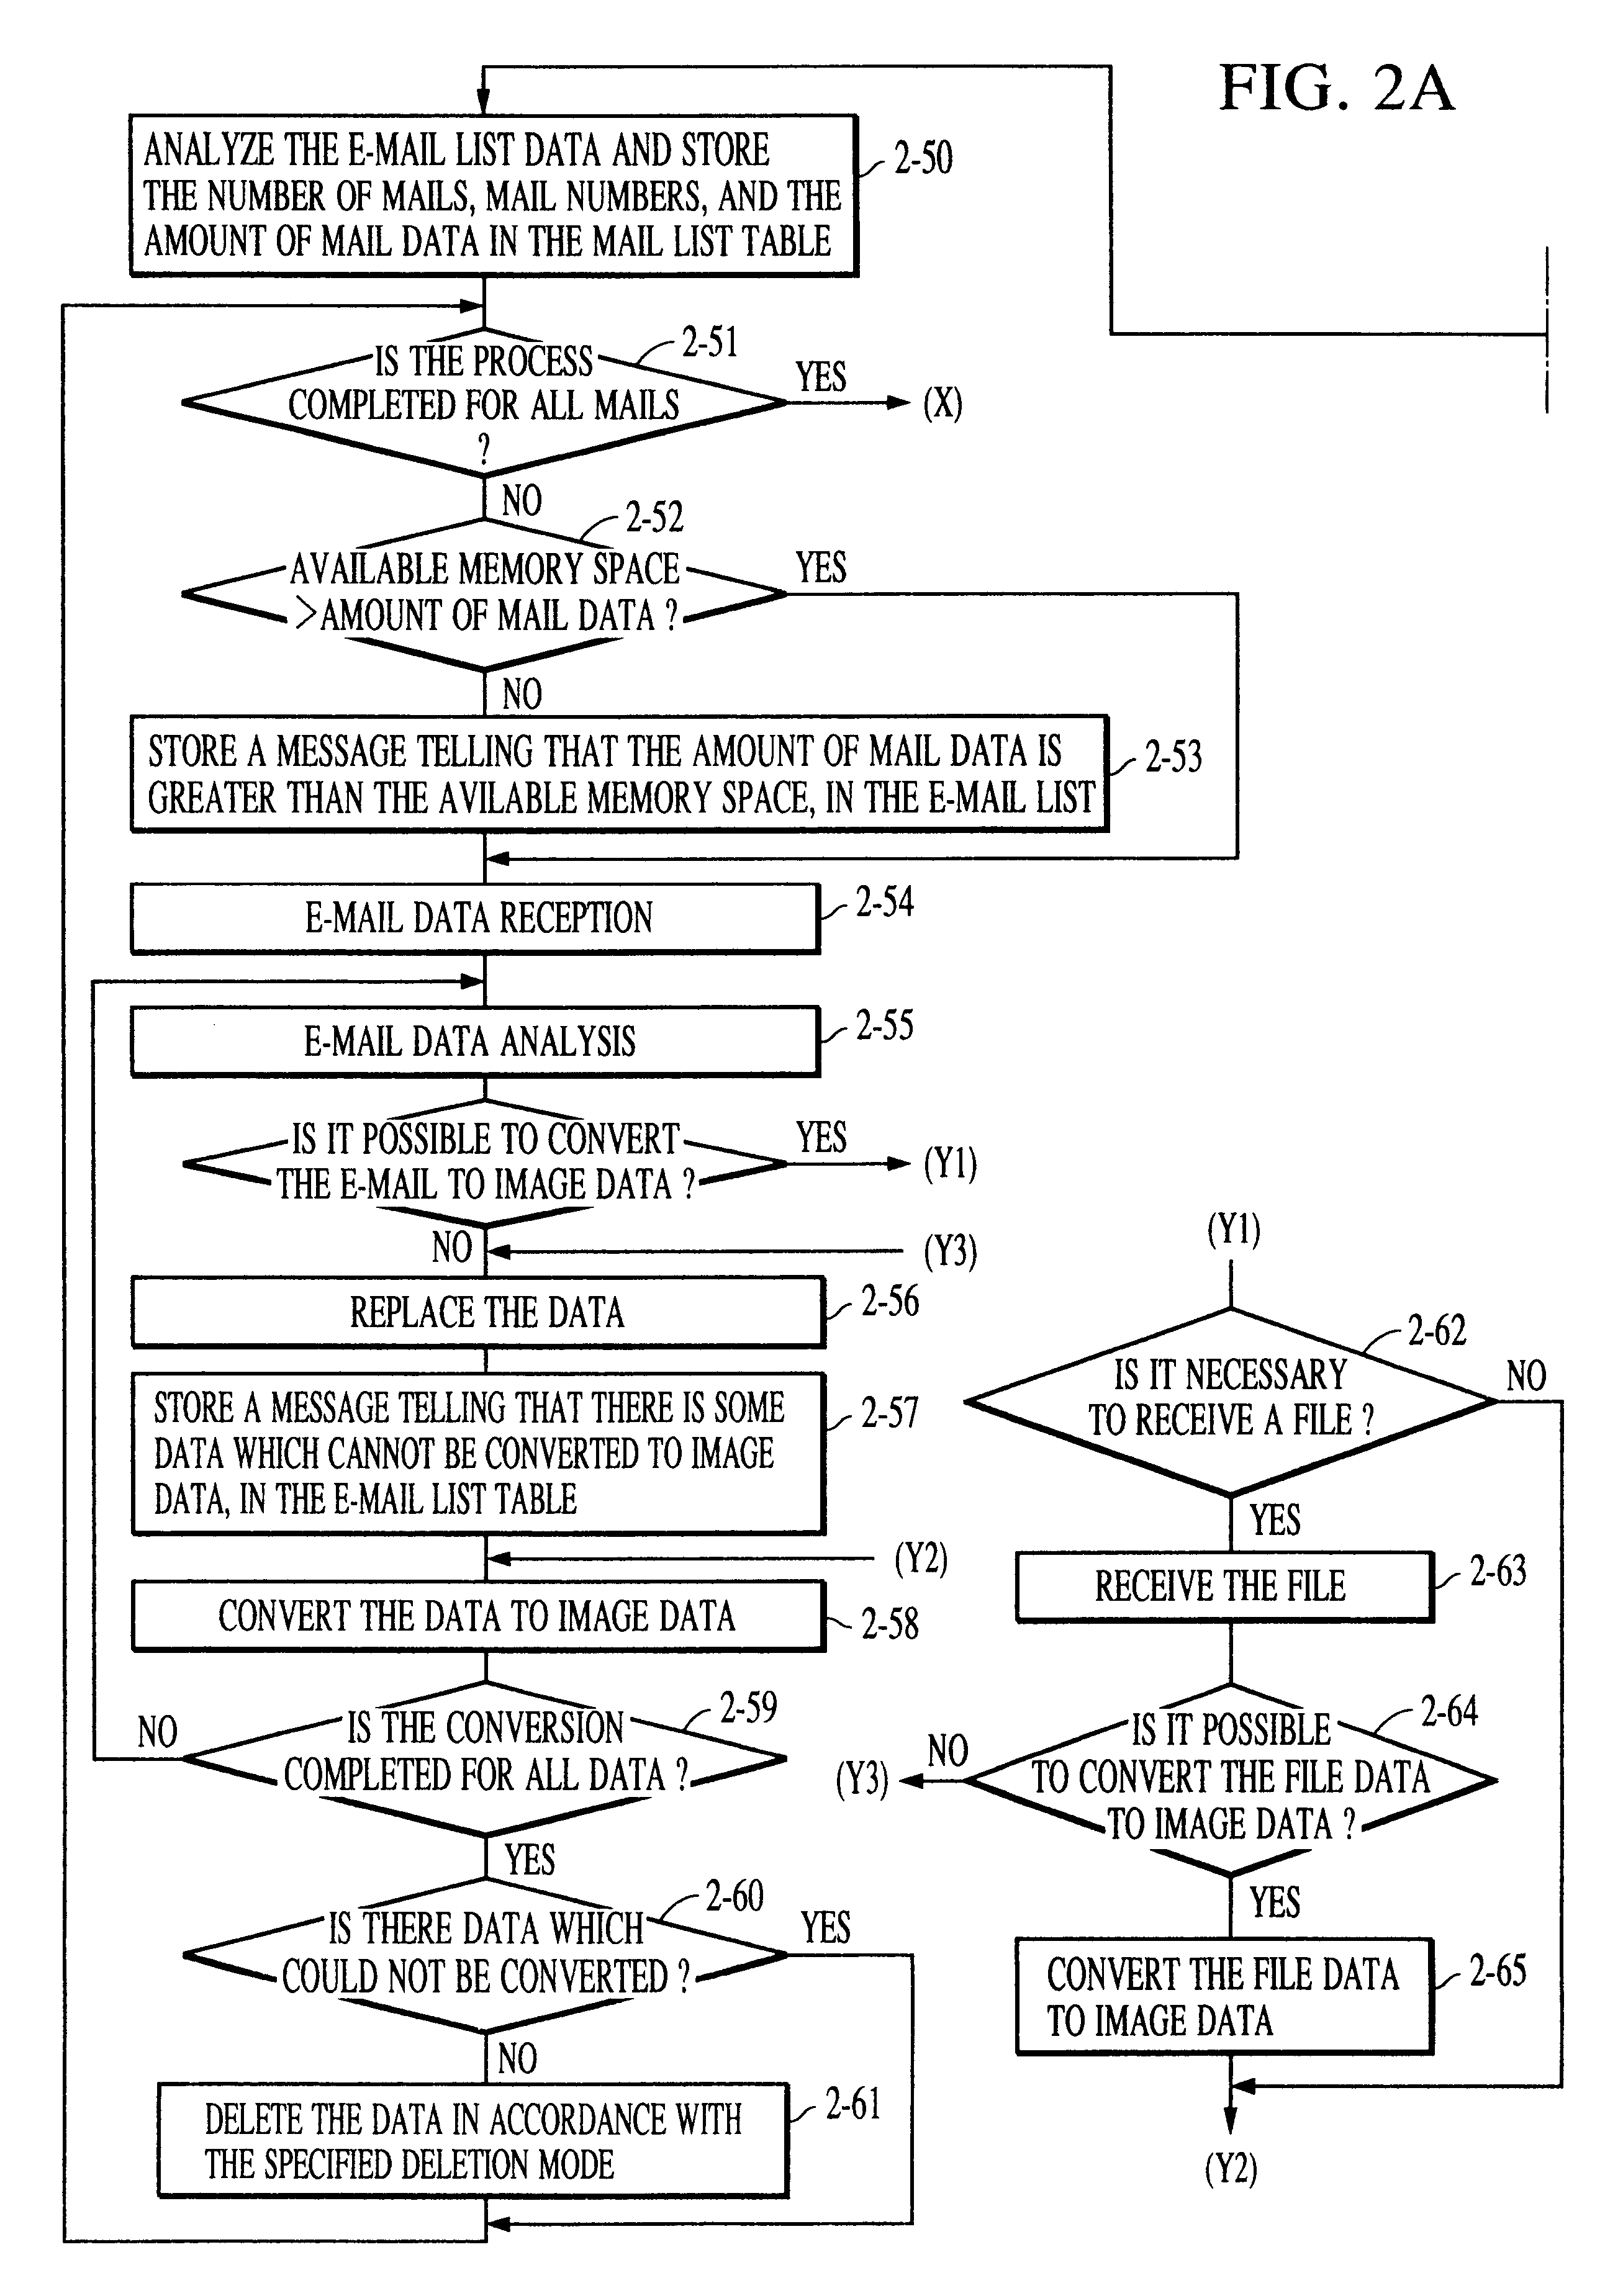 Communication device having the capability of performing information exchange between a facsimile medium and an electronic information medium such as an e-mail medium